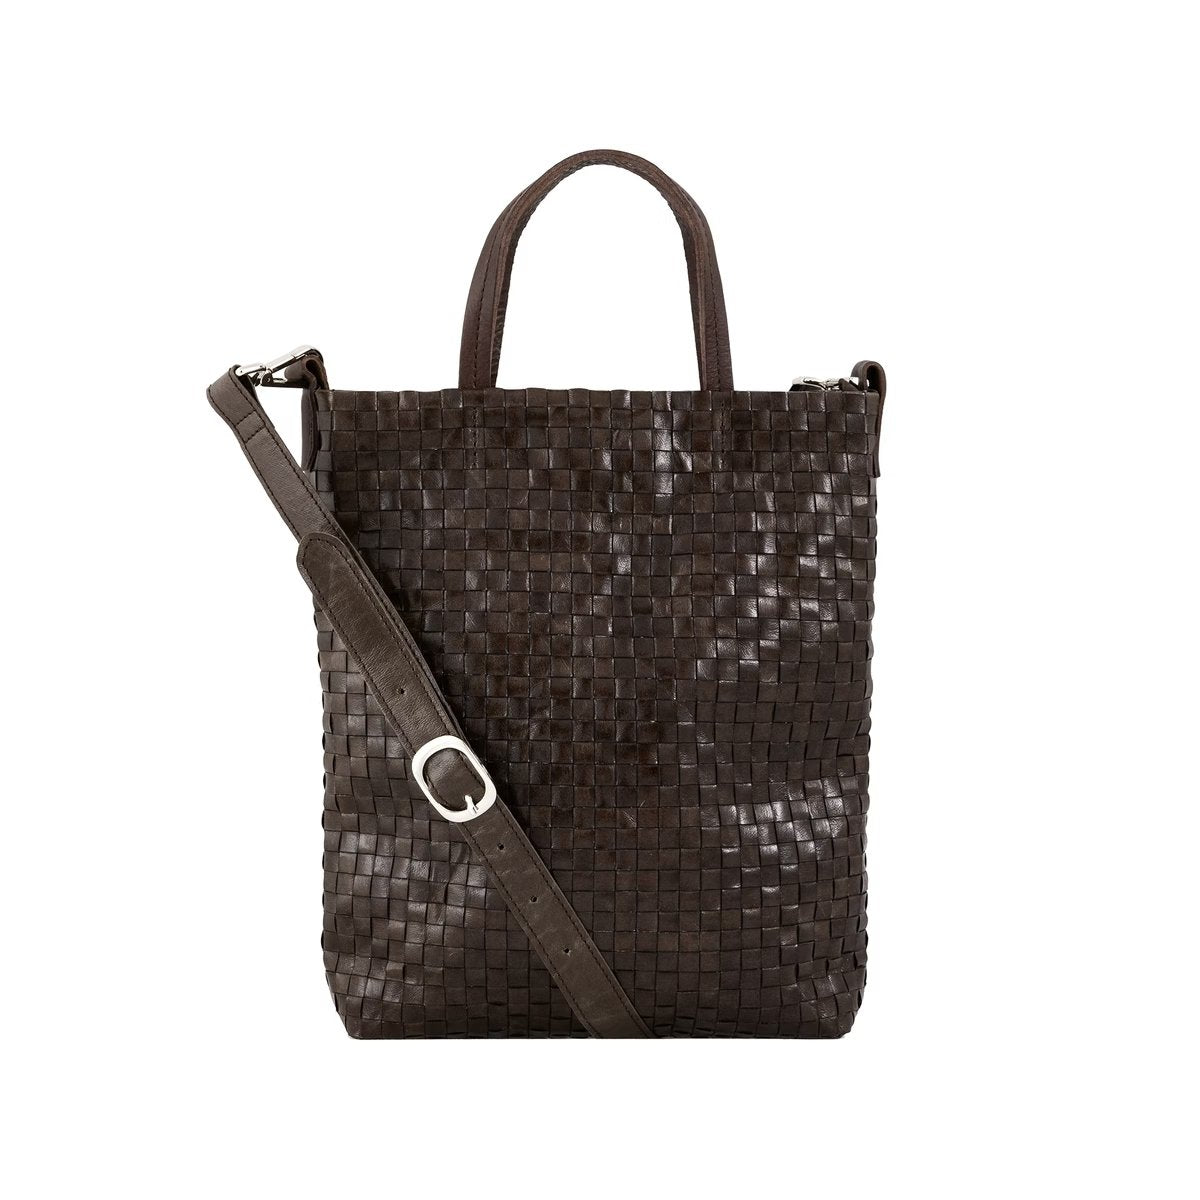 A woven washable paper tote bag is shown from the front angle. It features two top handles and a long adjustable shoulder strap. It is chocolate brown in colour.